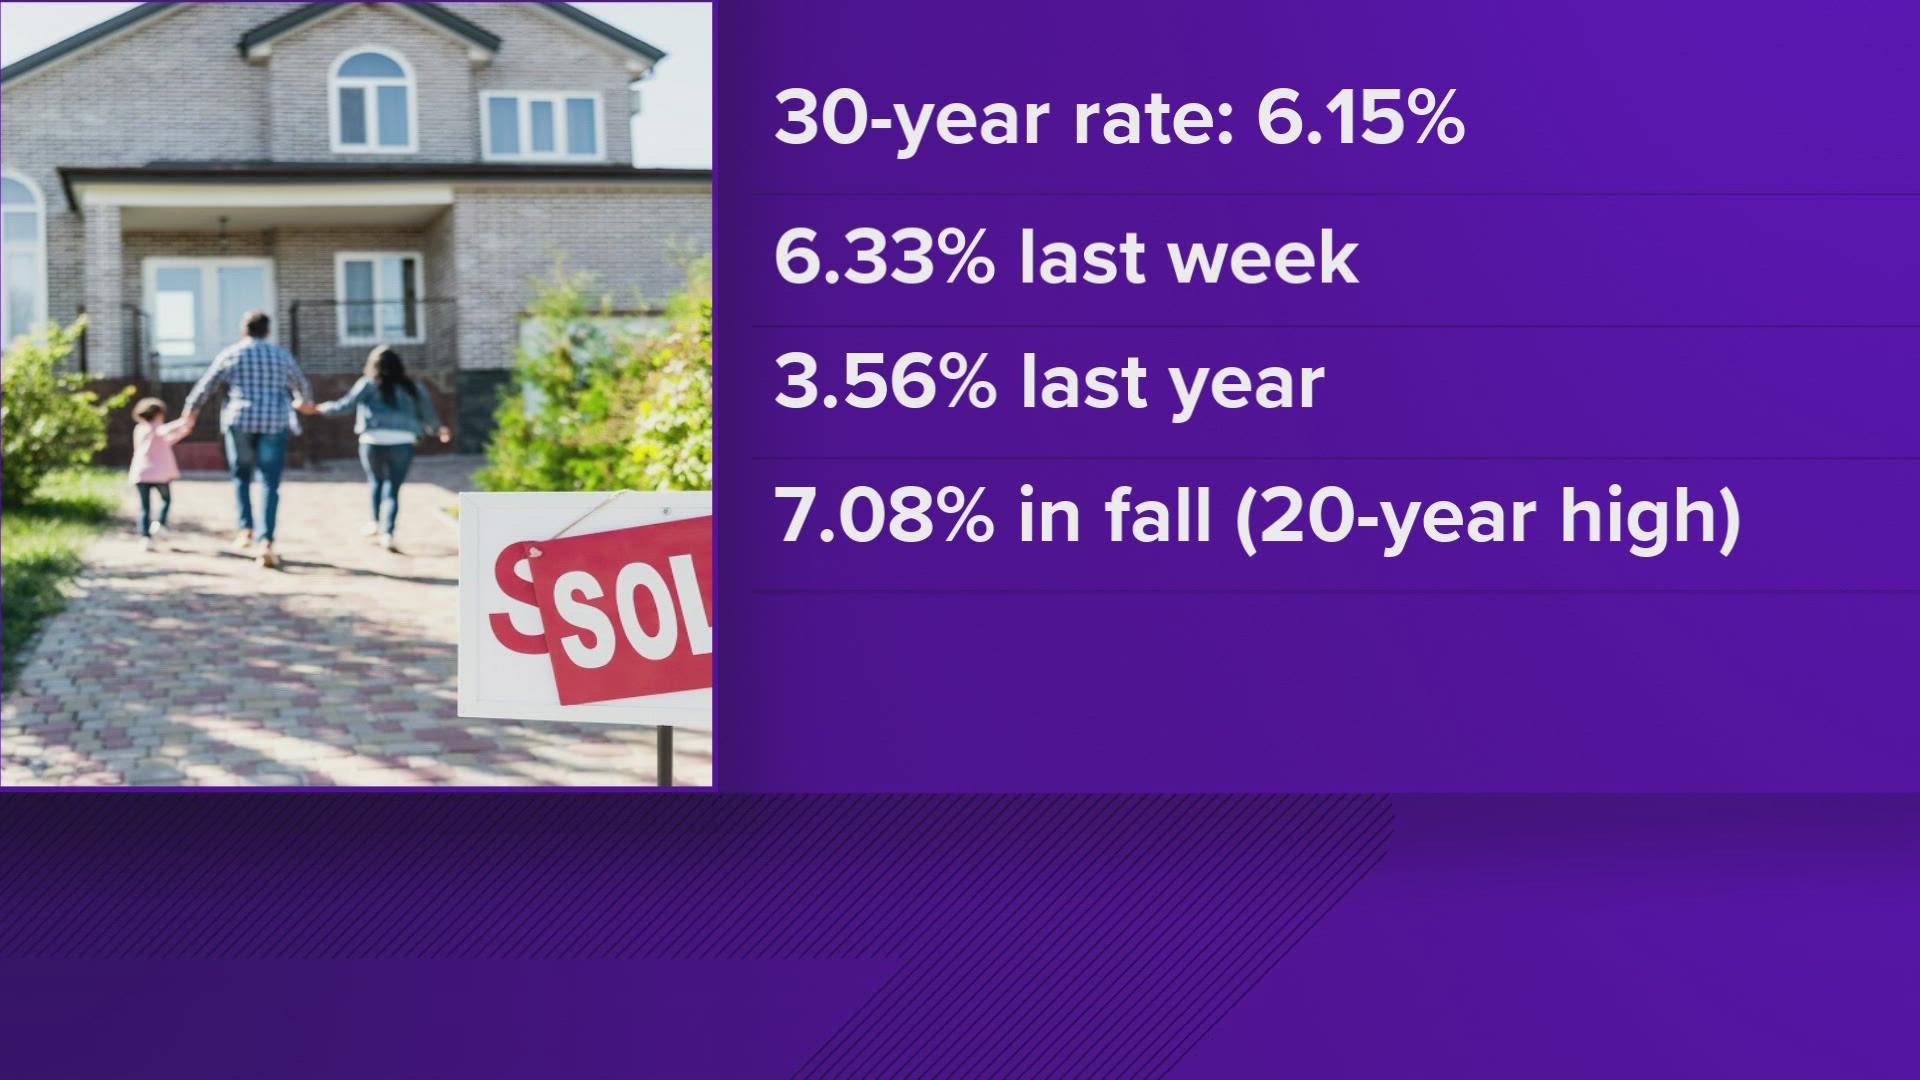 One year ago, the average rate was around 3.56 percent. This is the lowest the rate has been since September. In the fall, it reached a 20-year high at 7.08 percent.